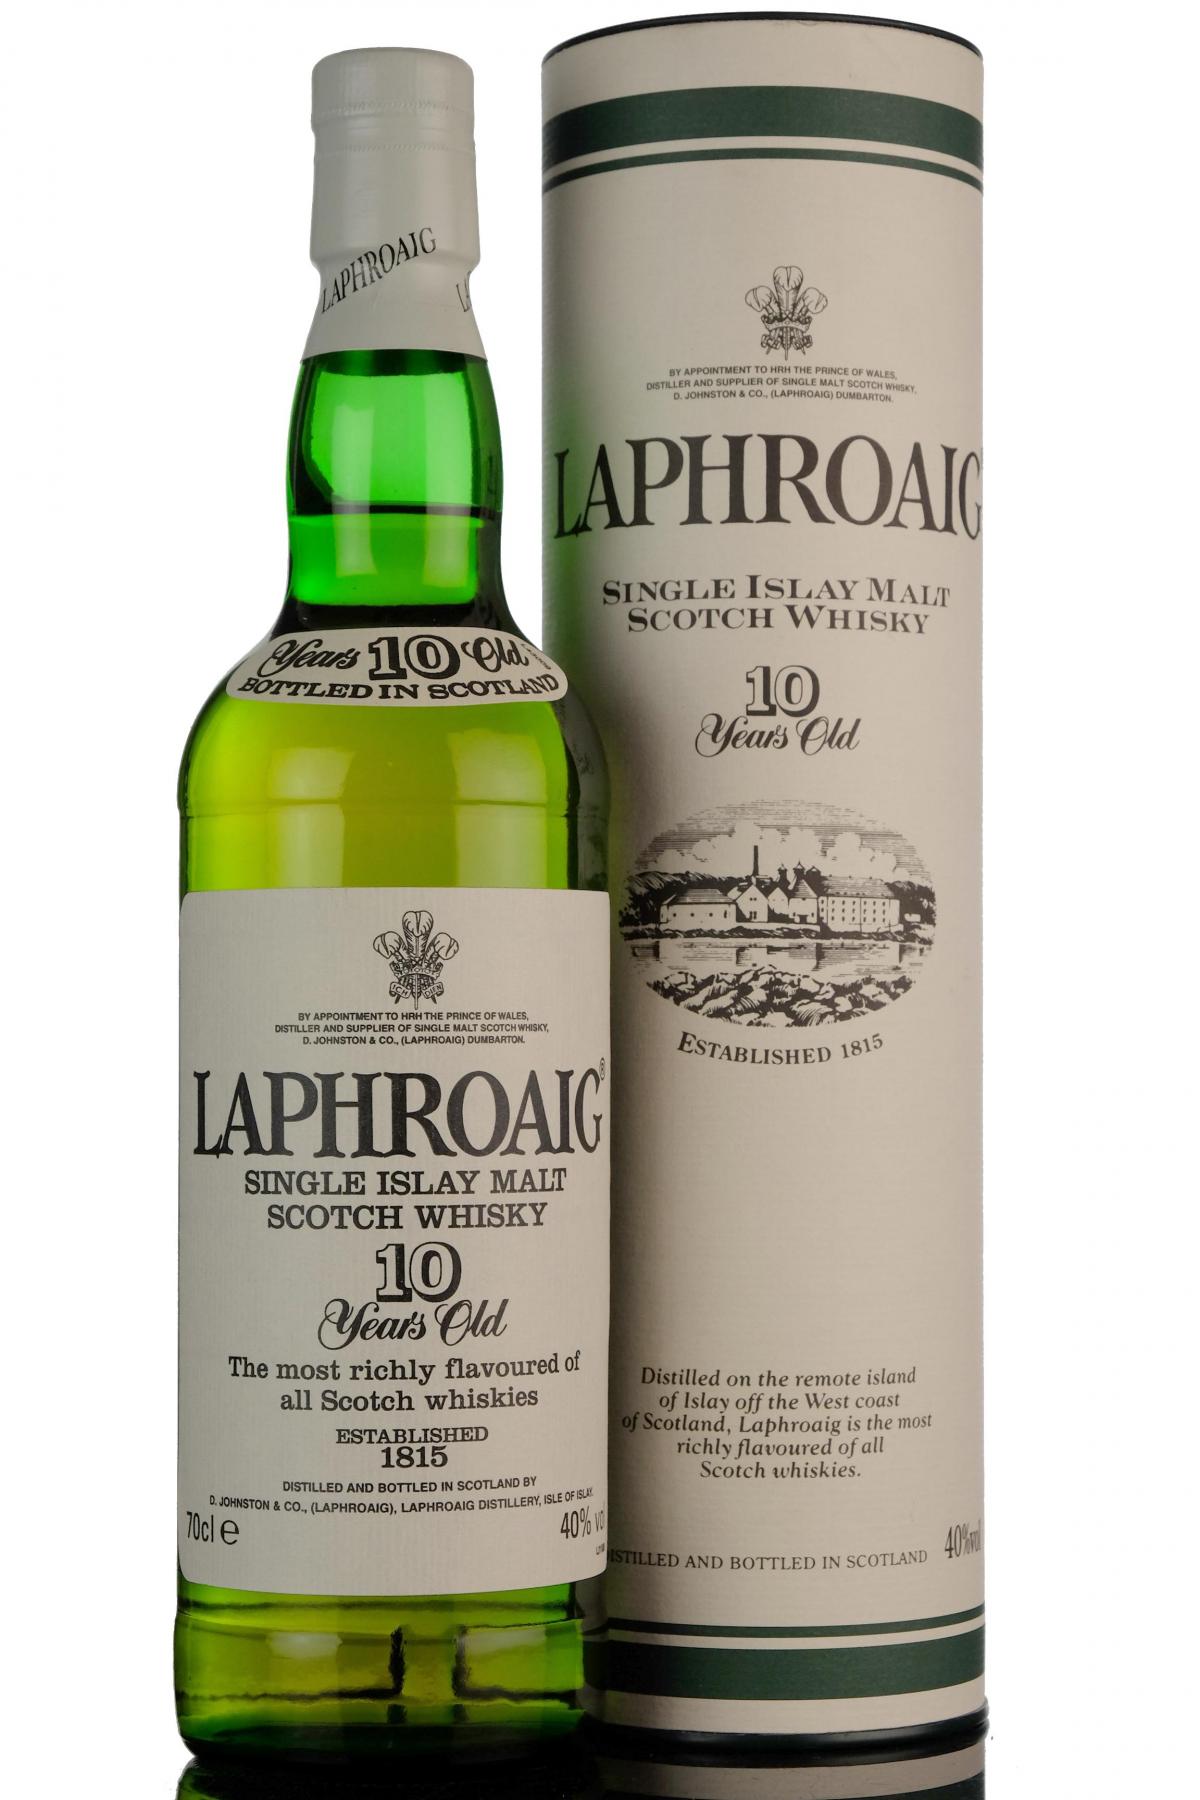 Laphroaig 10 Year Old - Late 1990s